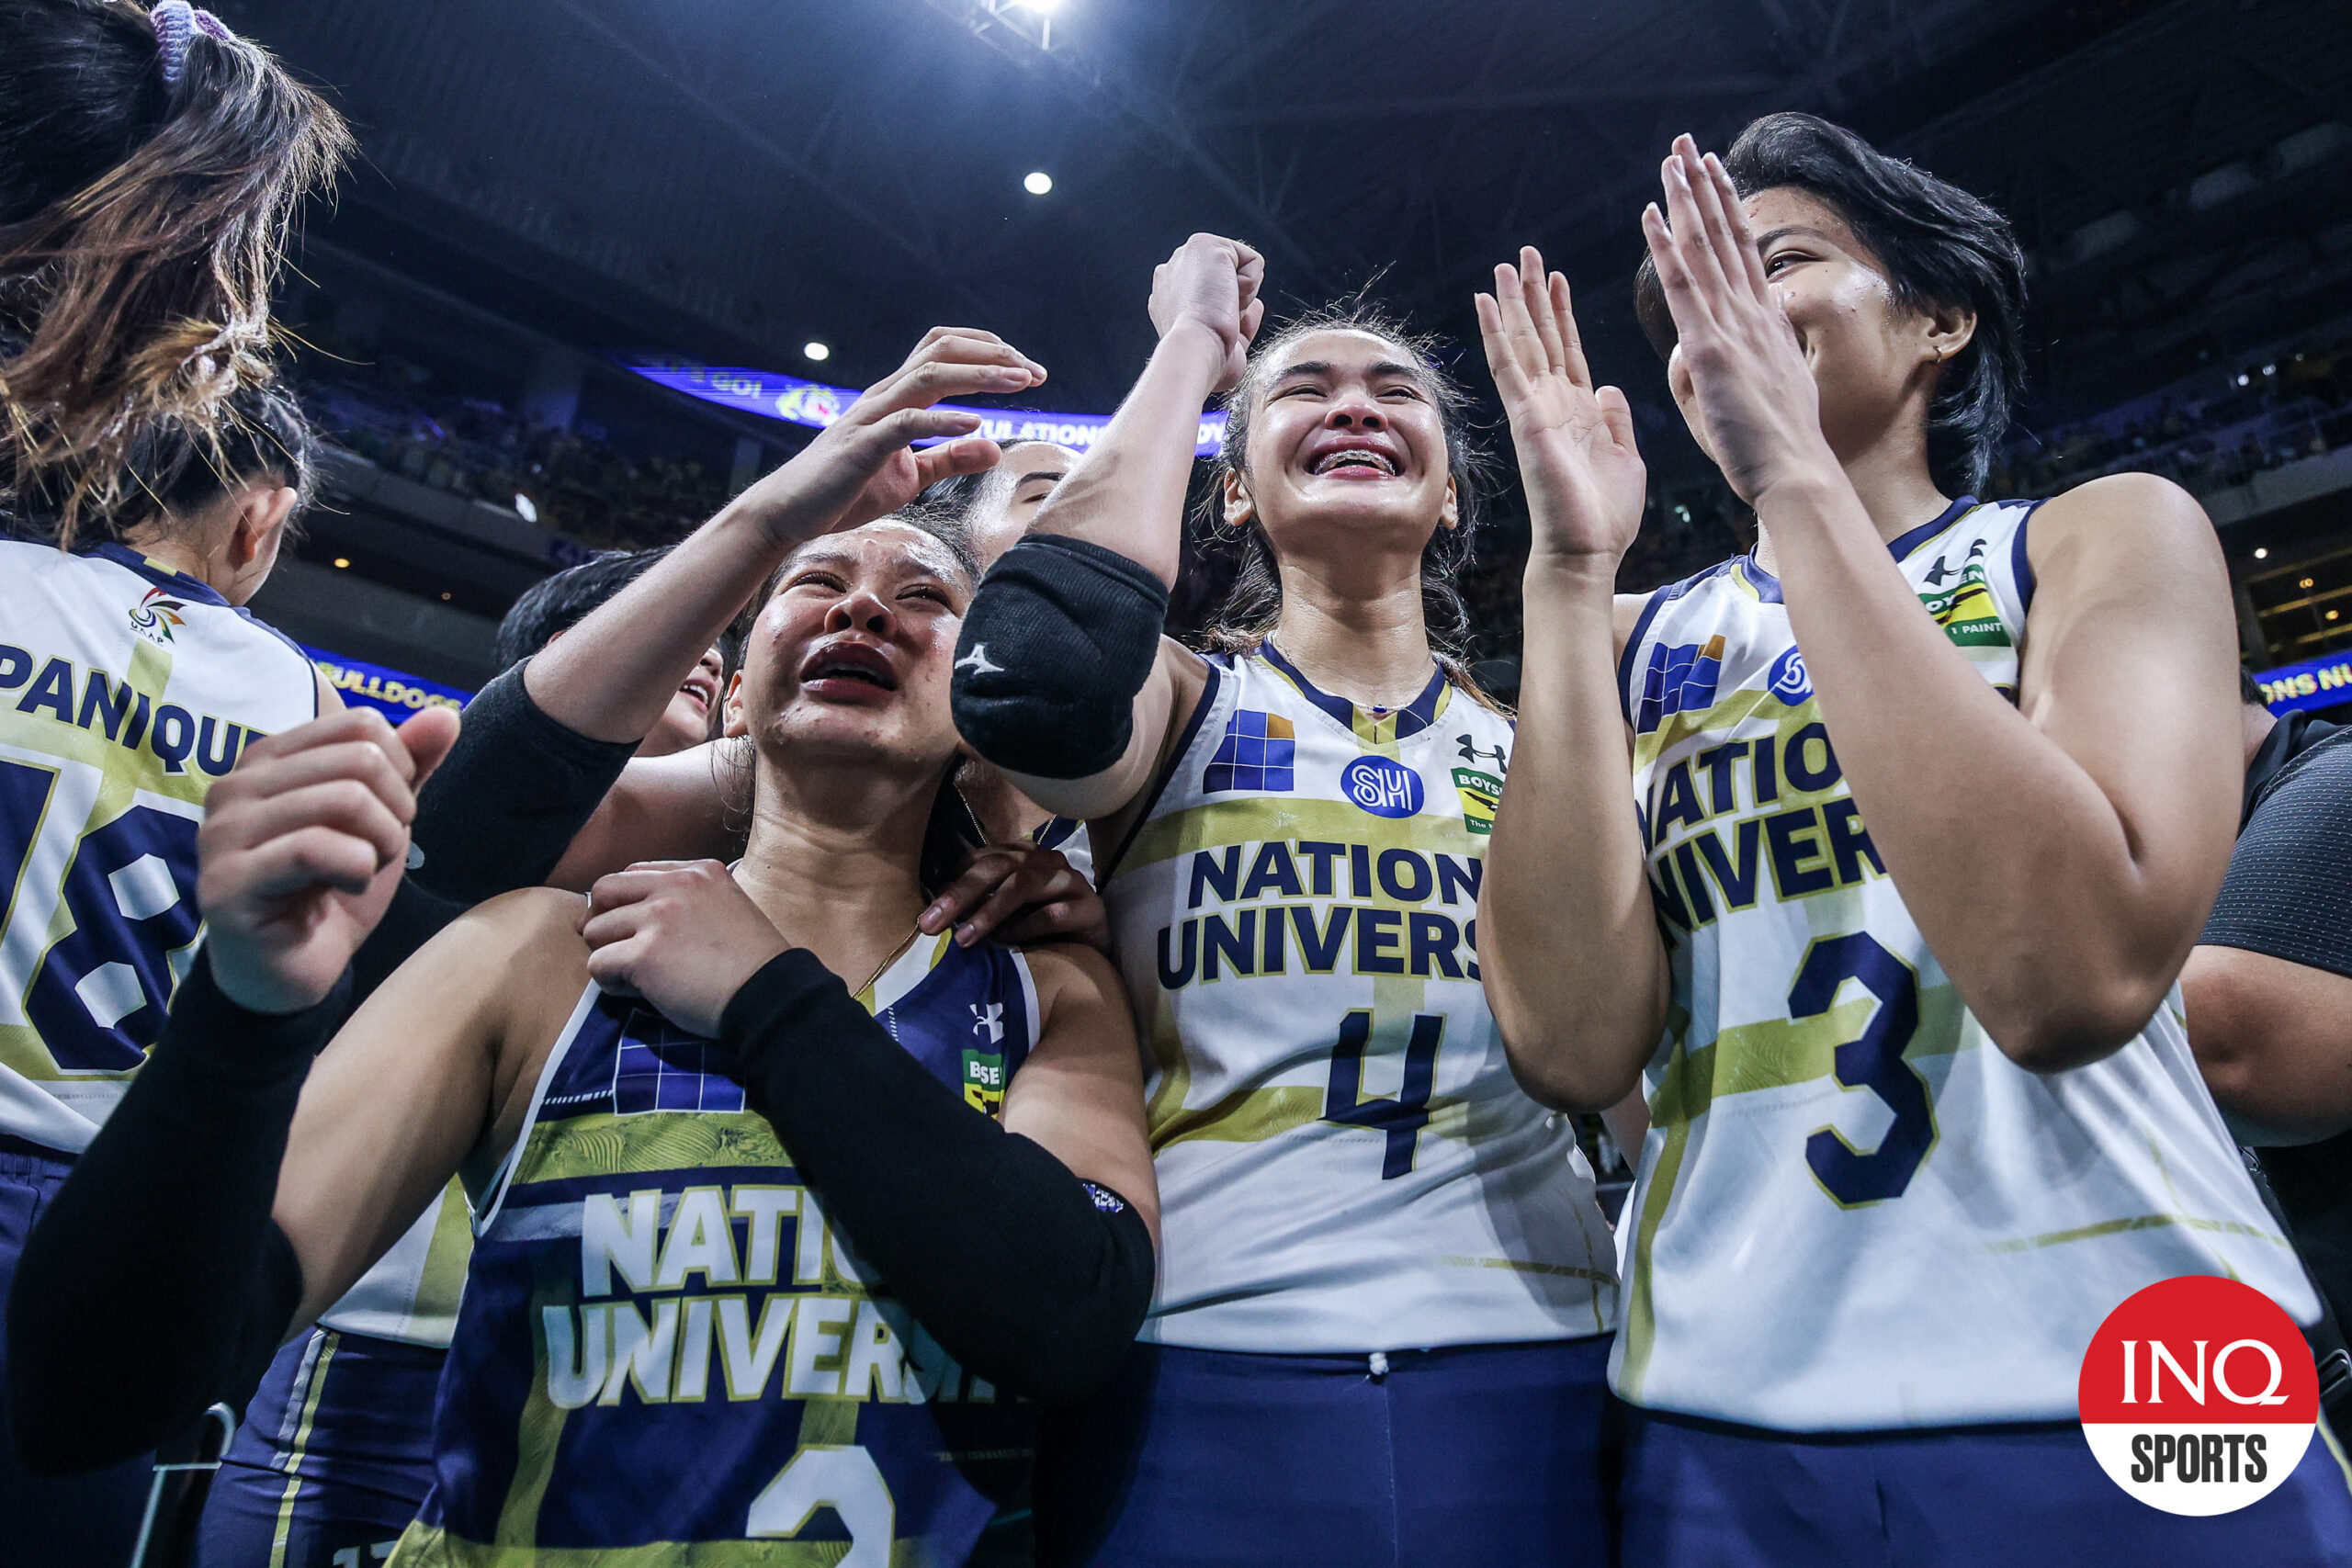 Bella Belen and the NU Lady Bulldogs after winning the UAAP Season 86 women's volleyball championship with a sweep of UST Tigresse